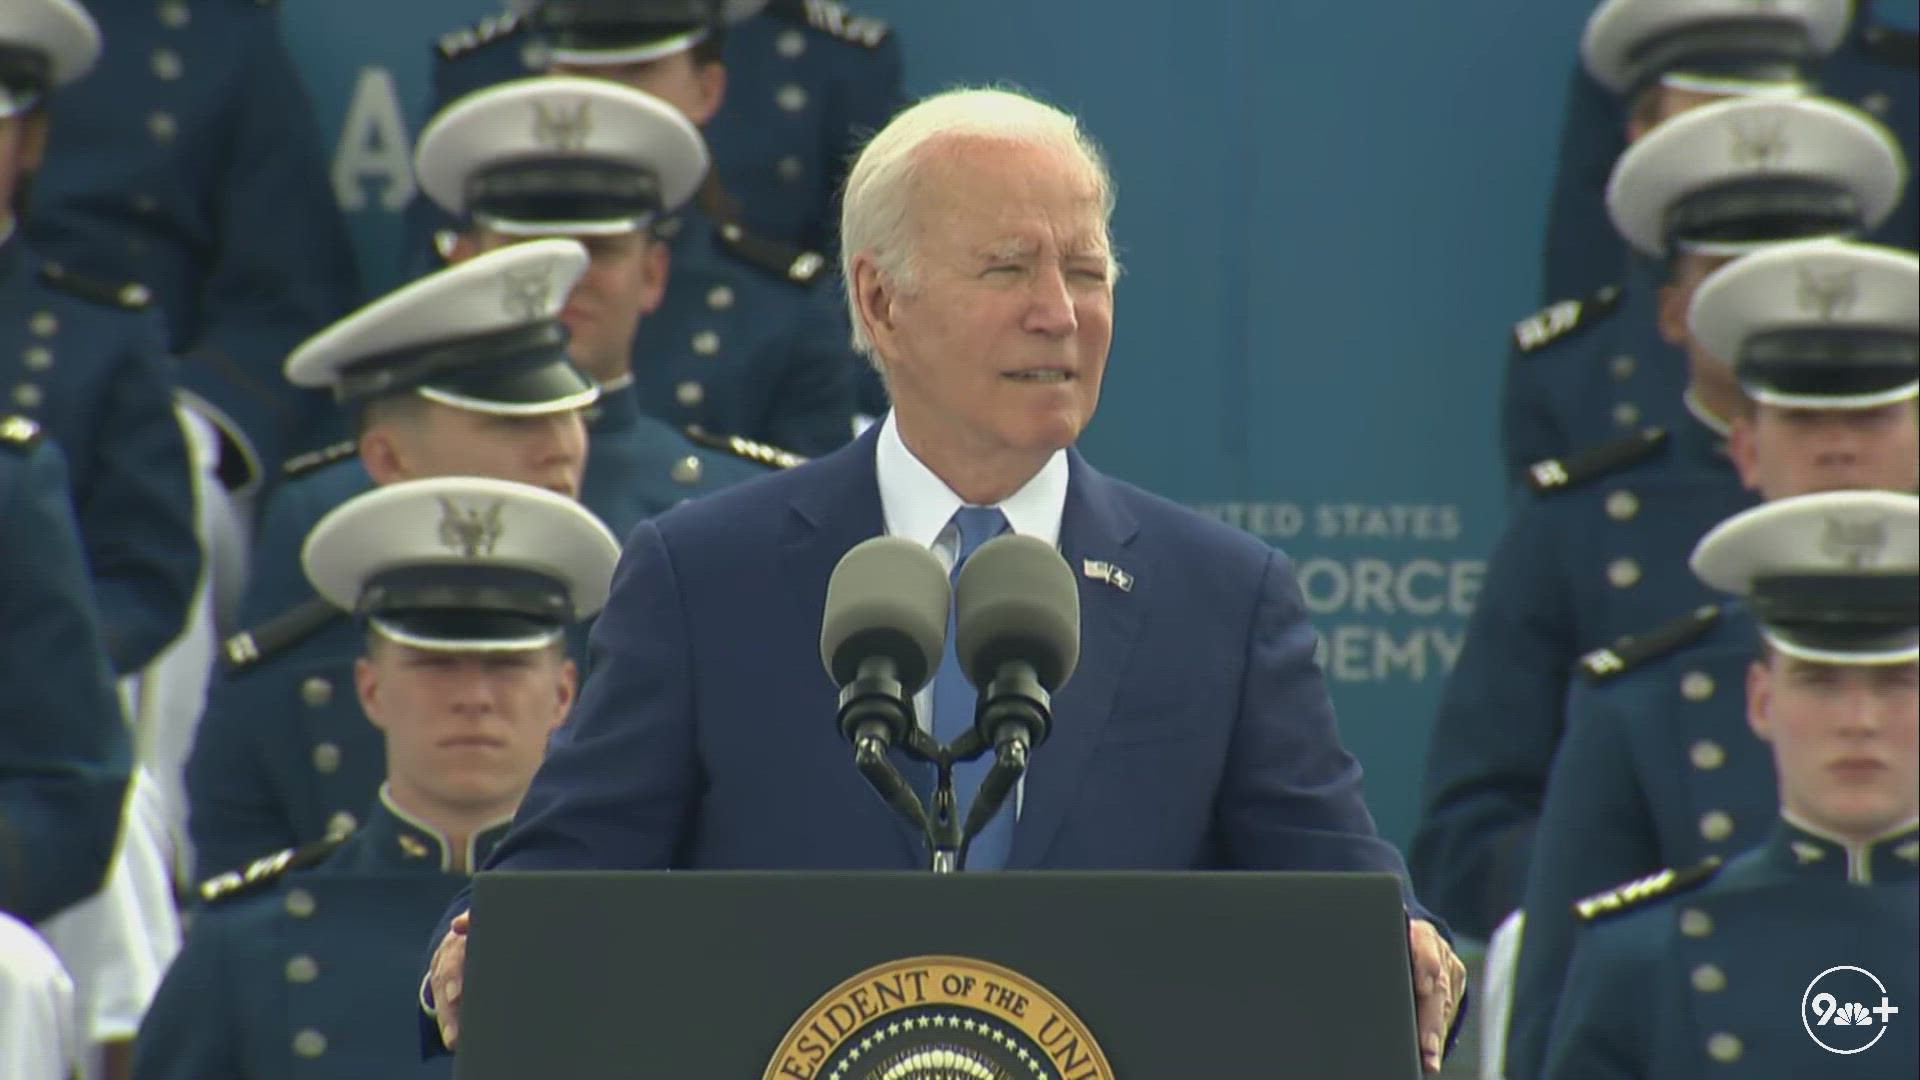 President Joe Biden delivered the commencement address at the U.S. Air Force Academy's graduation ceremony on Thursday morning.